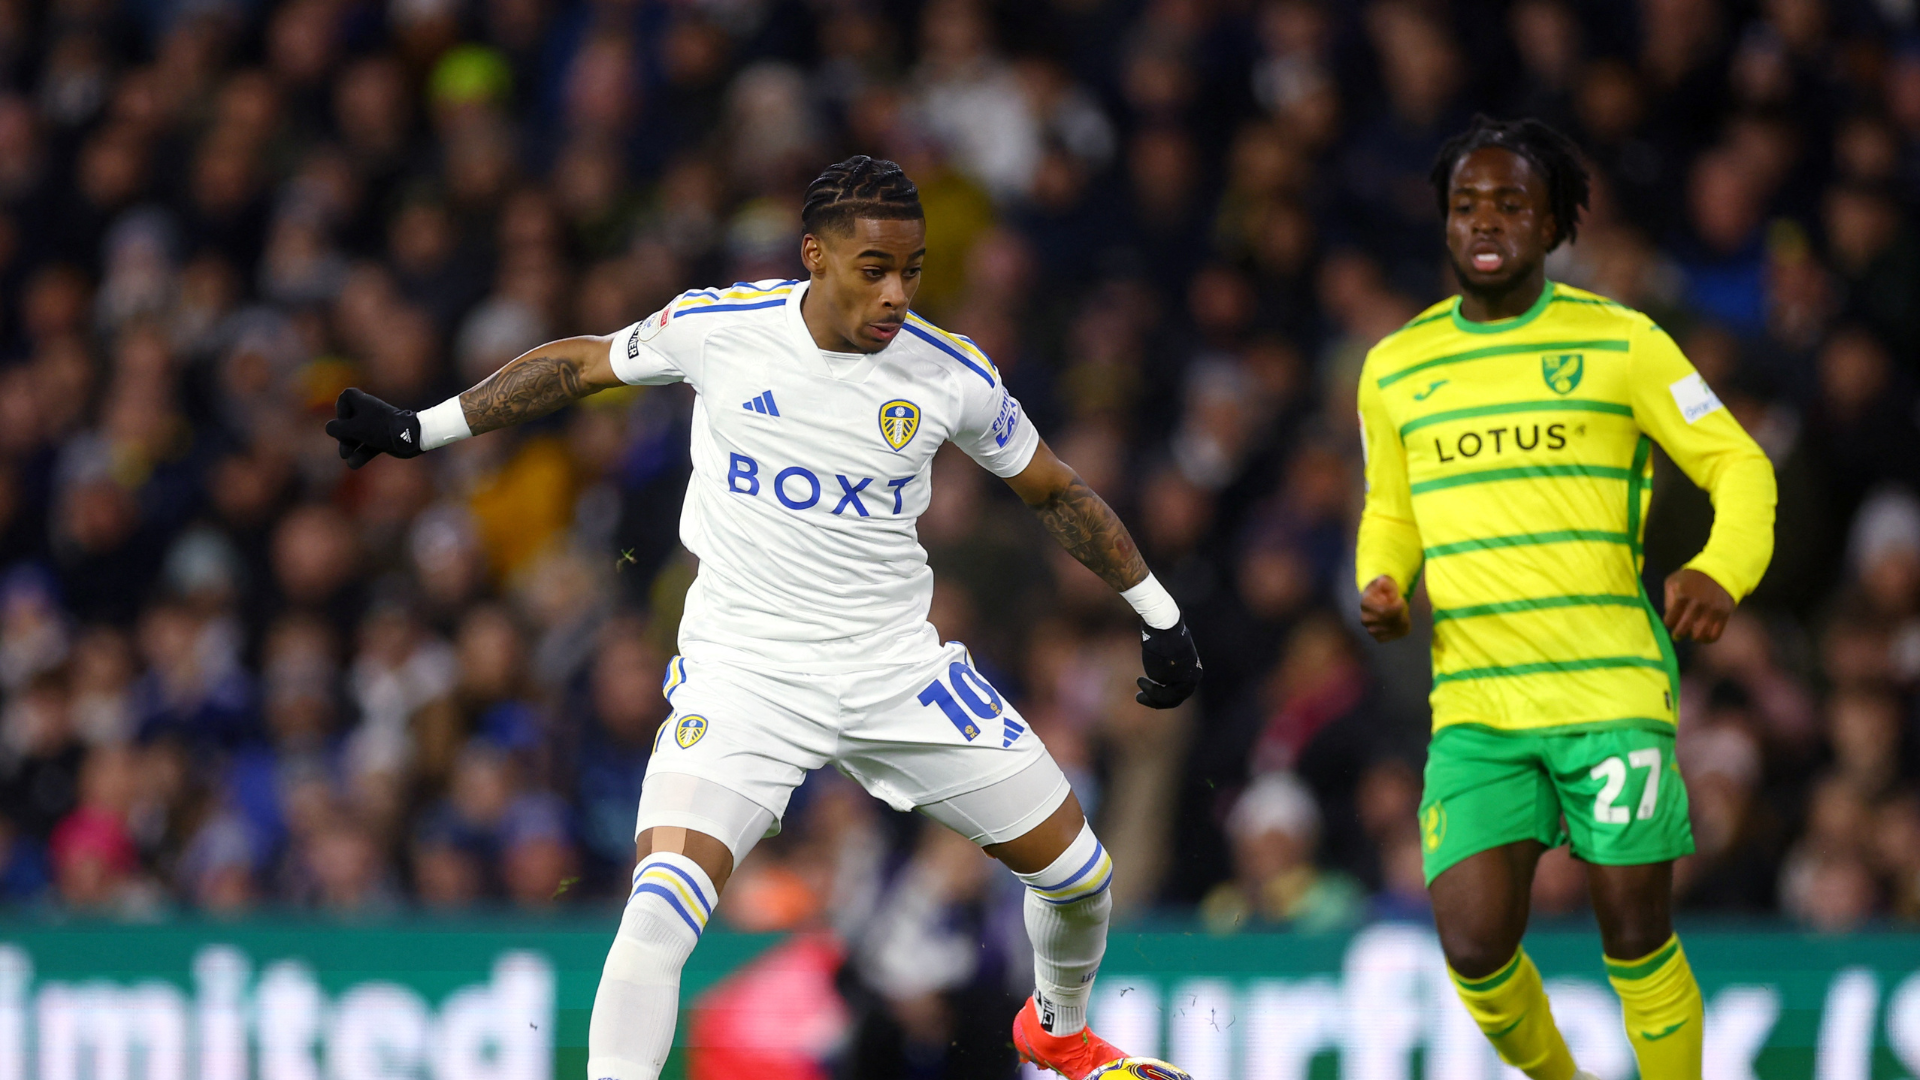 Drameh to leave? Two replacements Leeds United must pursue as